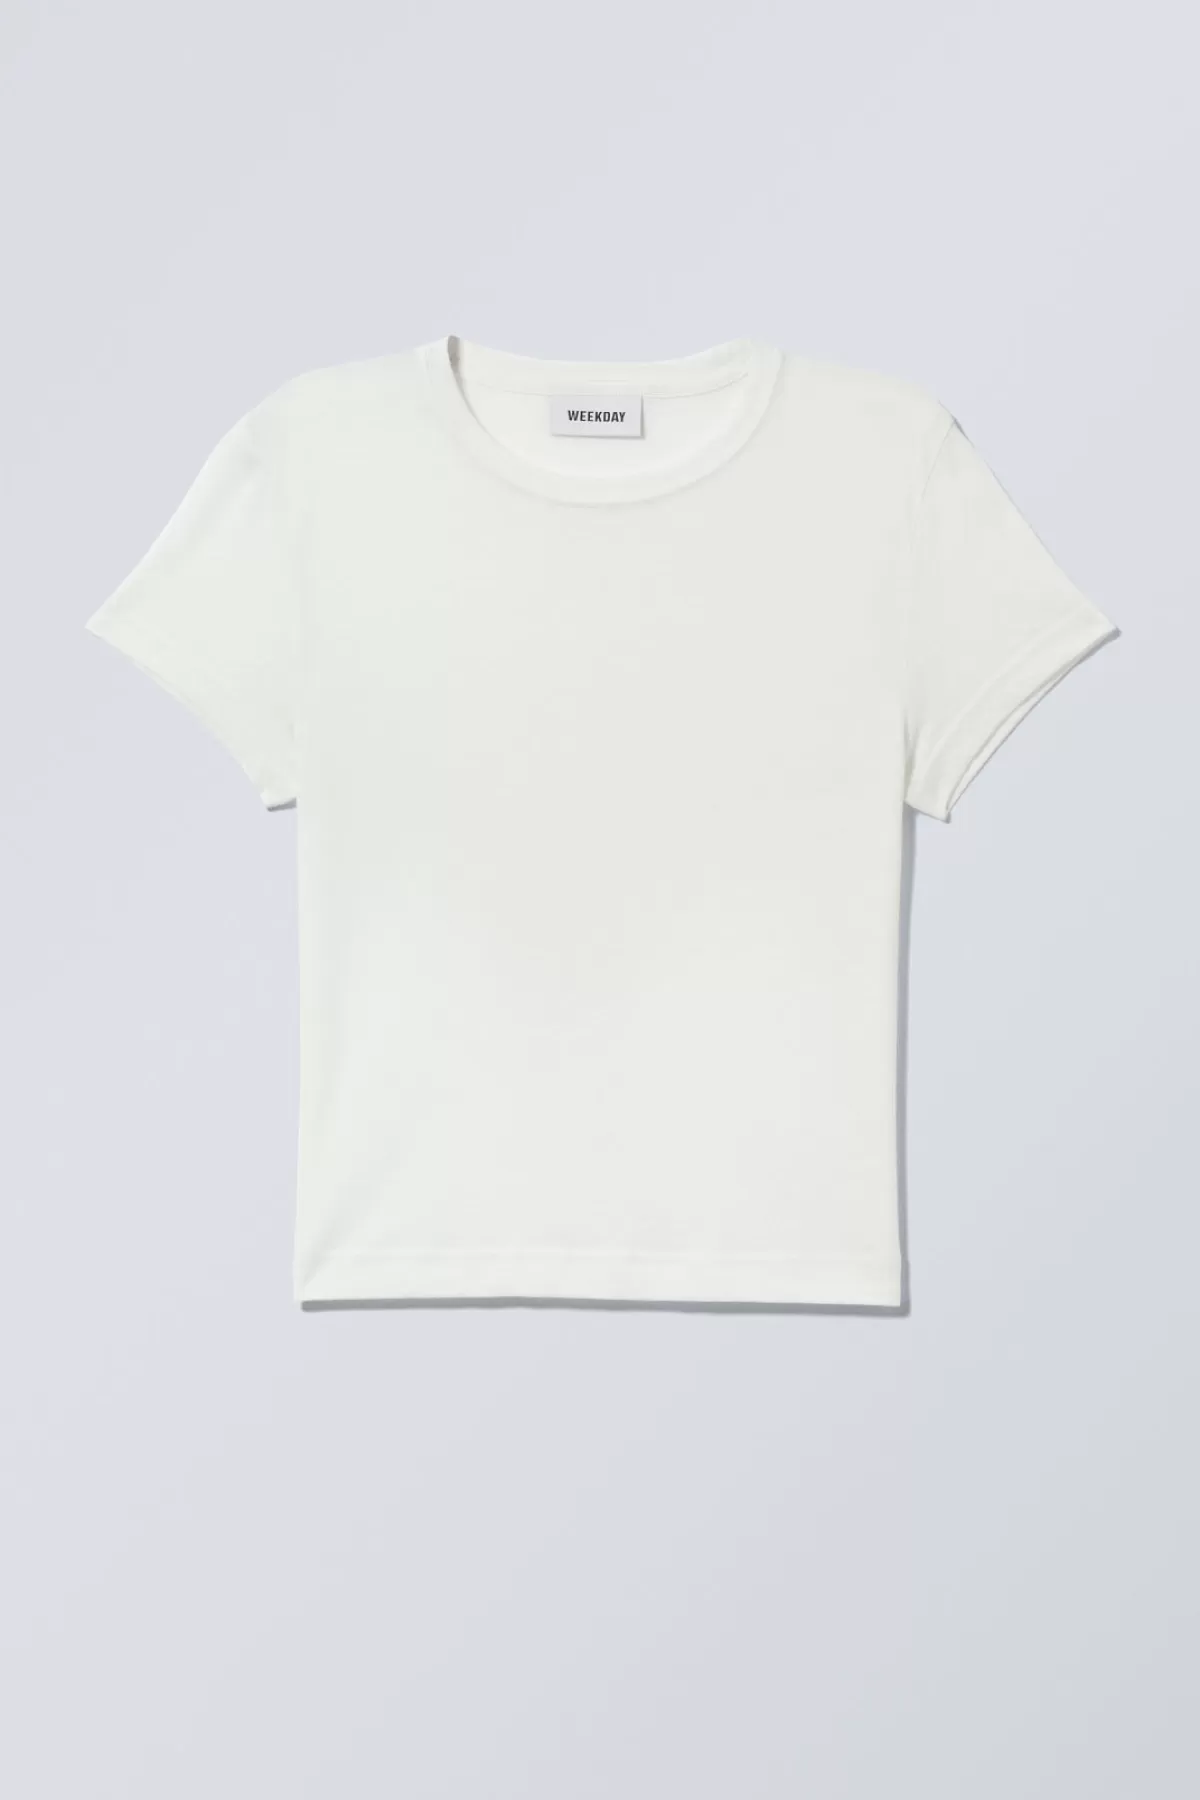 Weekday Tight Fitted T- shirt Cheap